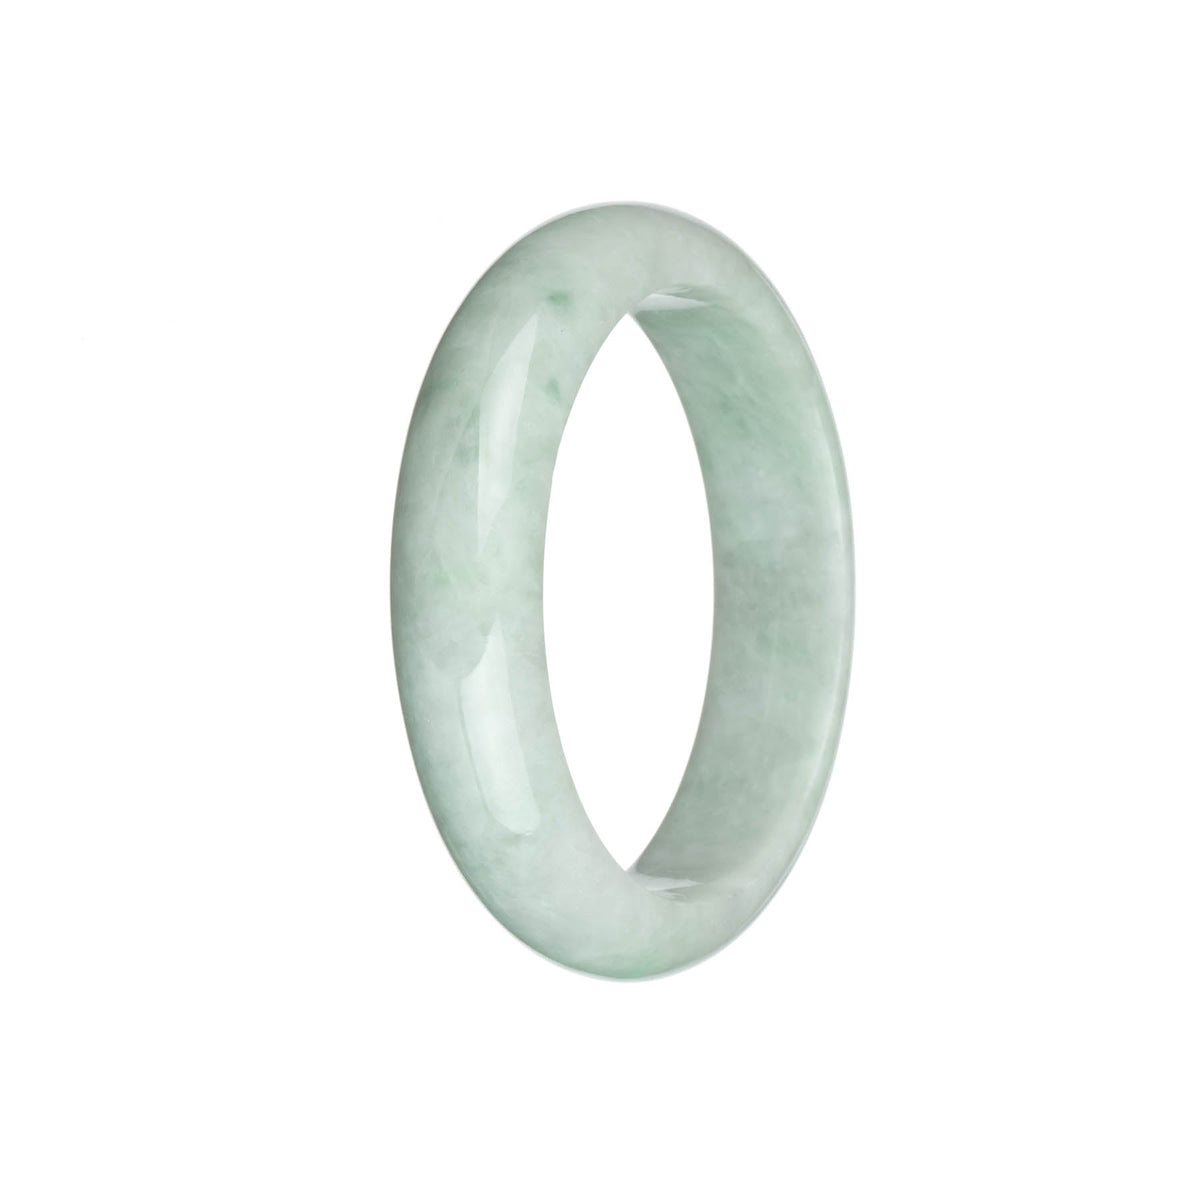 A close-up photo of a half-moon shaped green jade bracelet, with a smooth and polished surface. The jade is of high quality, certified as Grade A. The bracelet measures 59mm in diameter and is a traditional design. It is sold by MAYS GEMS.